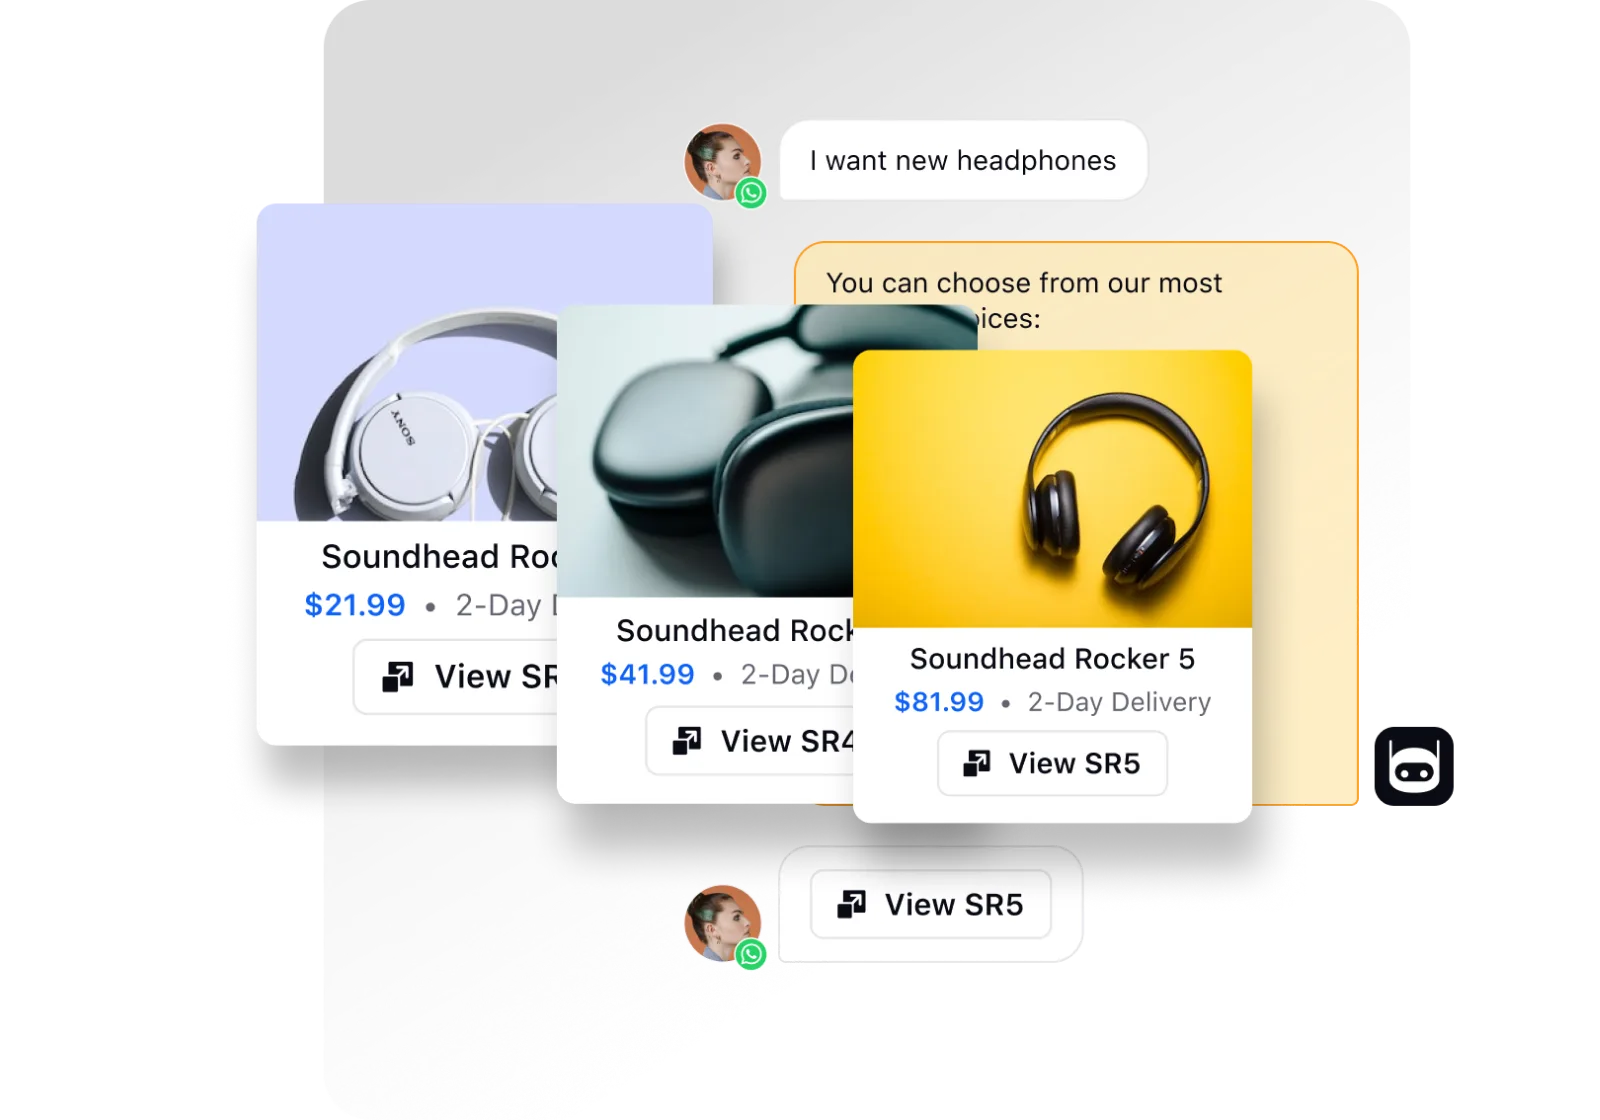 Product recommendations generated by conversational AI in Sprinklr Service